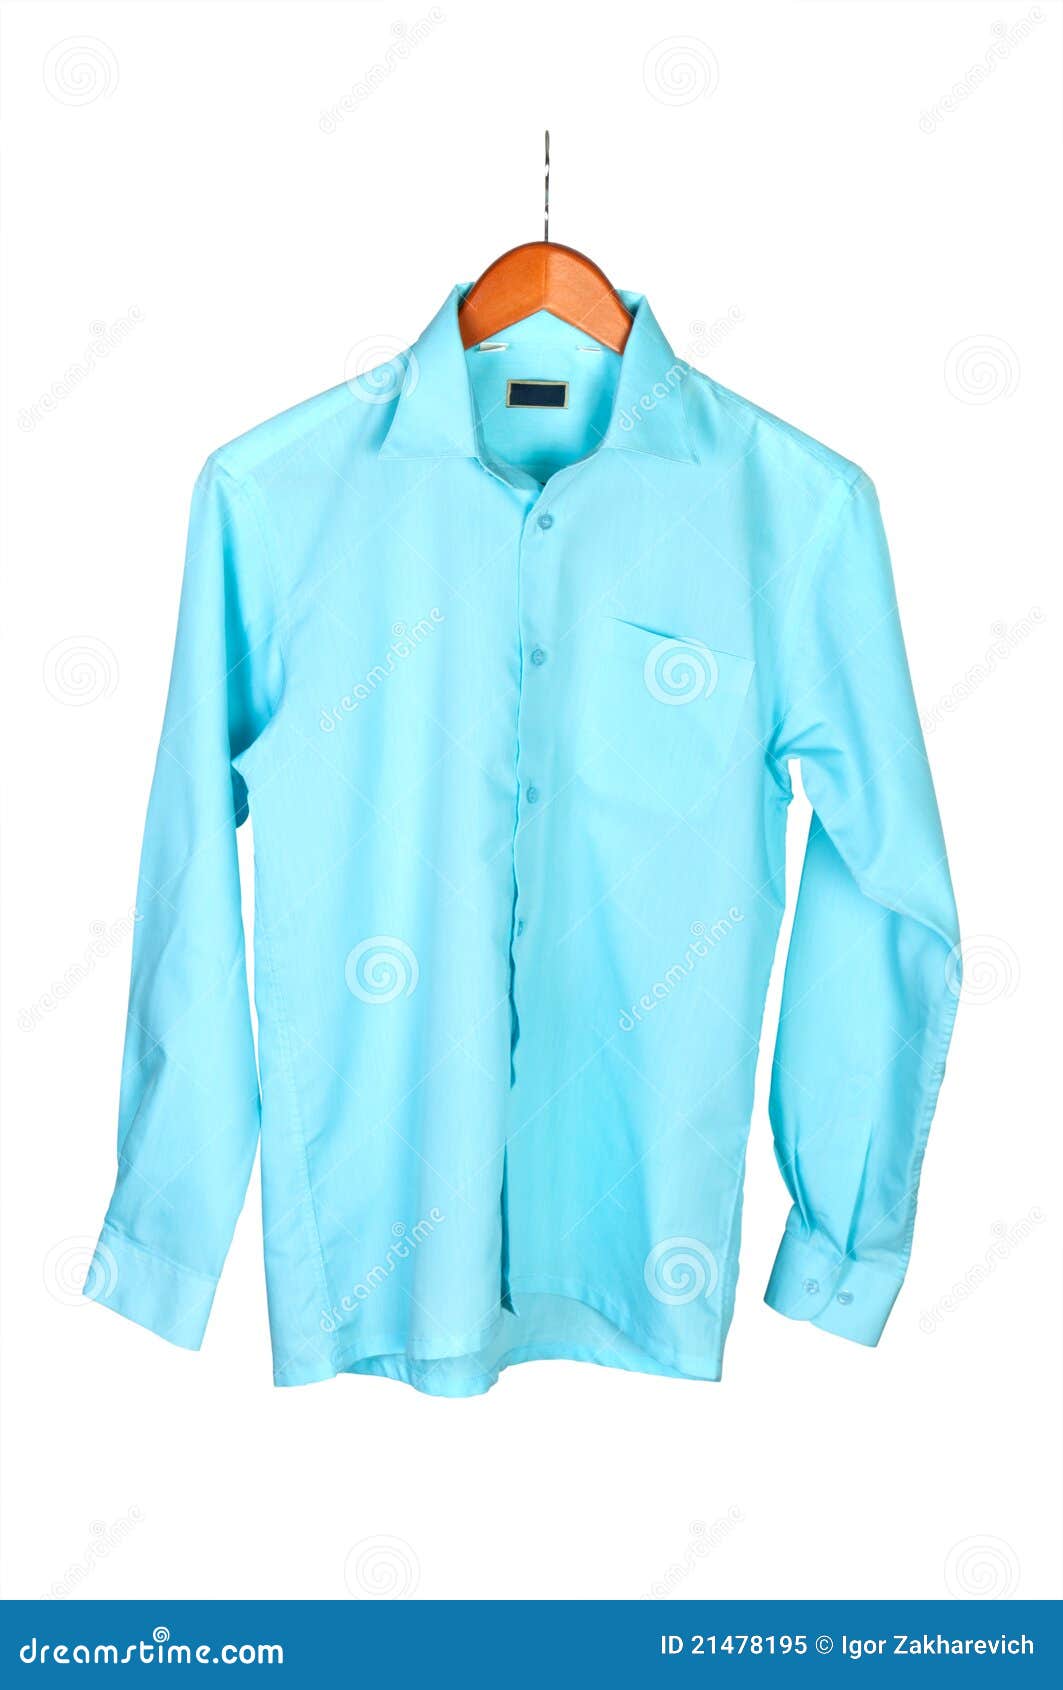 Shirt on hanger stock image. Image of apparel, style - 21478195